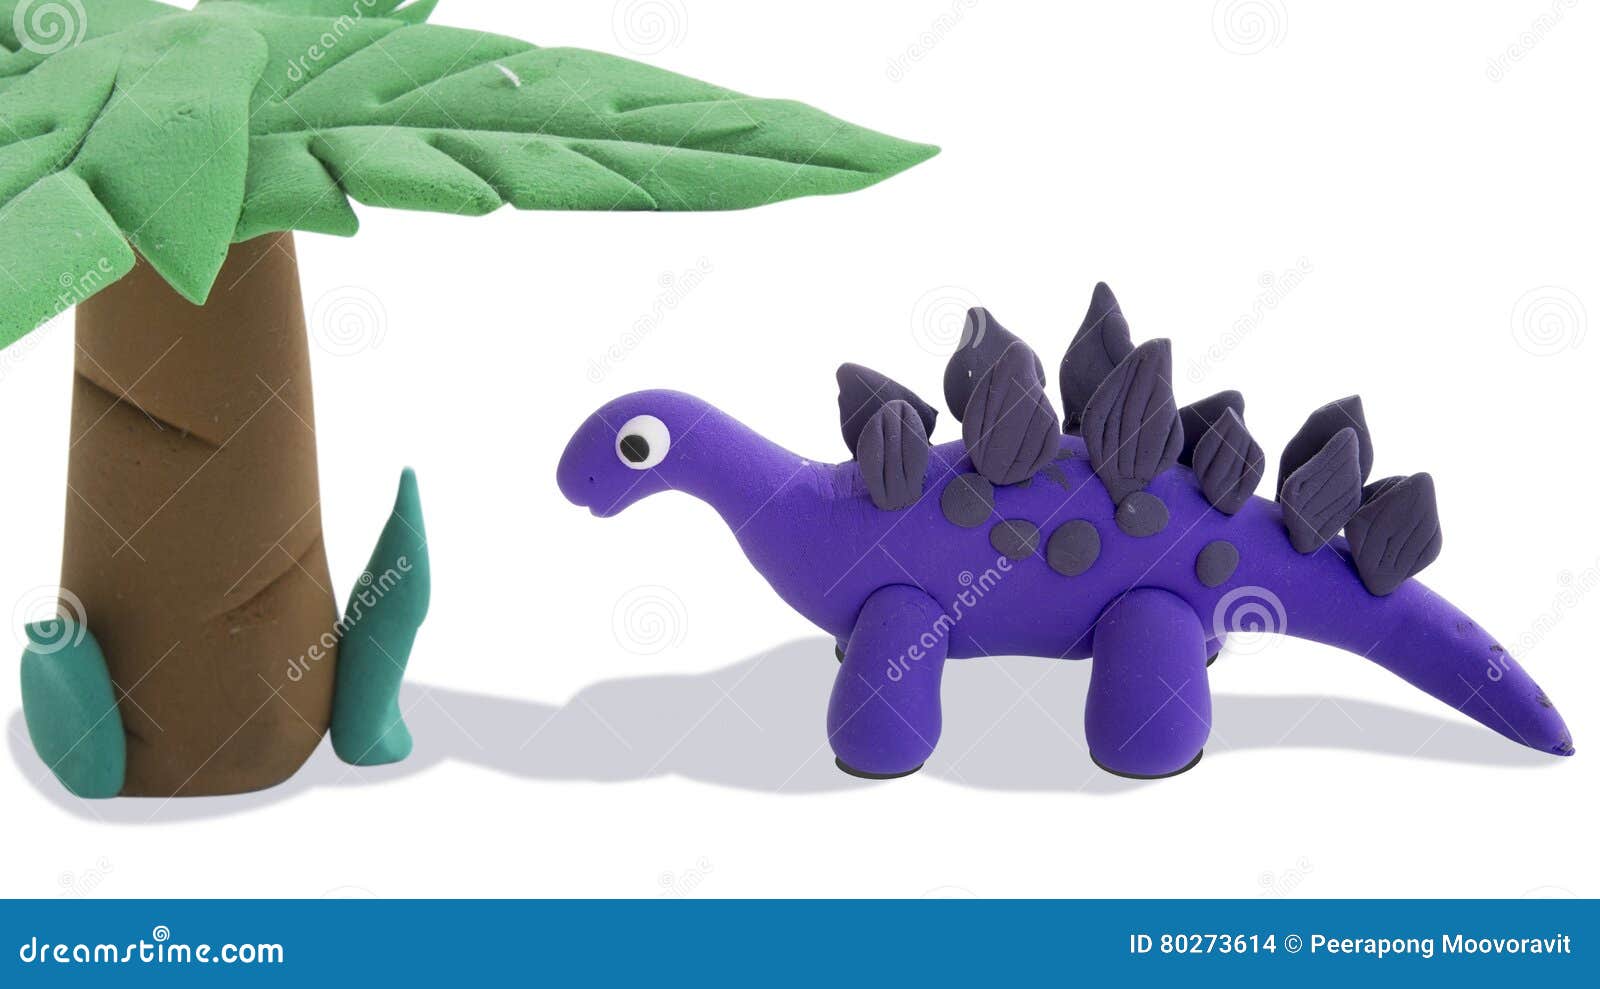 Dinosaur Models With Clay